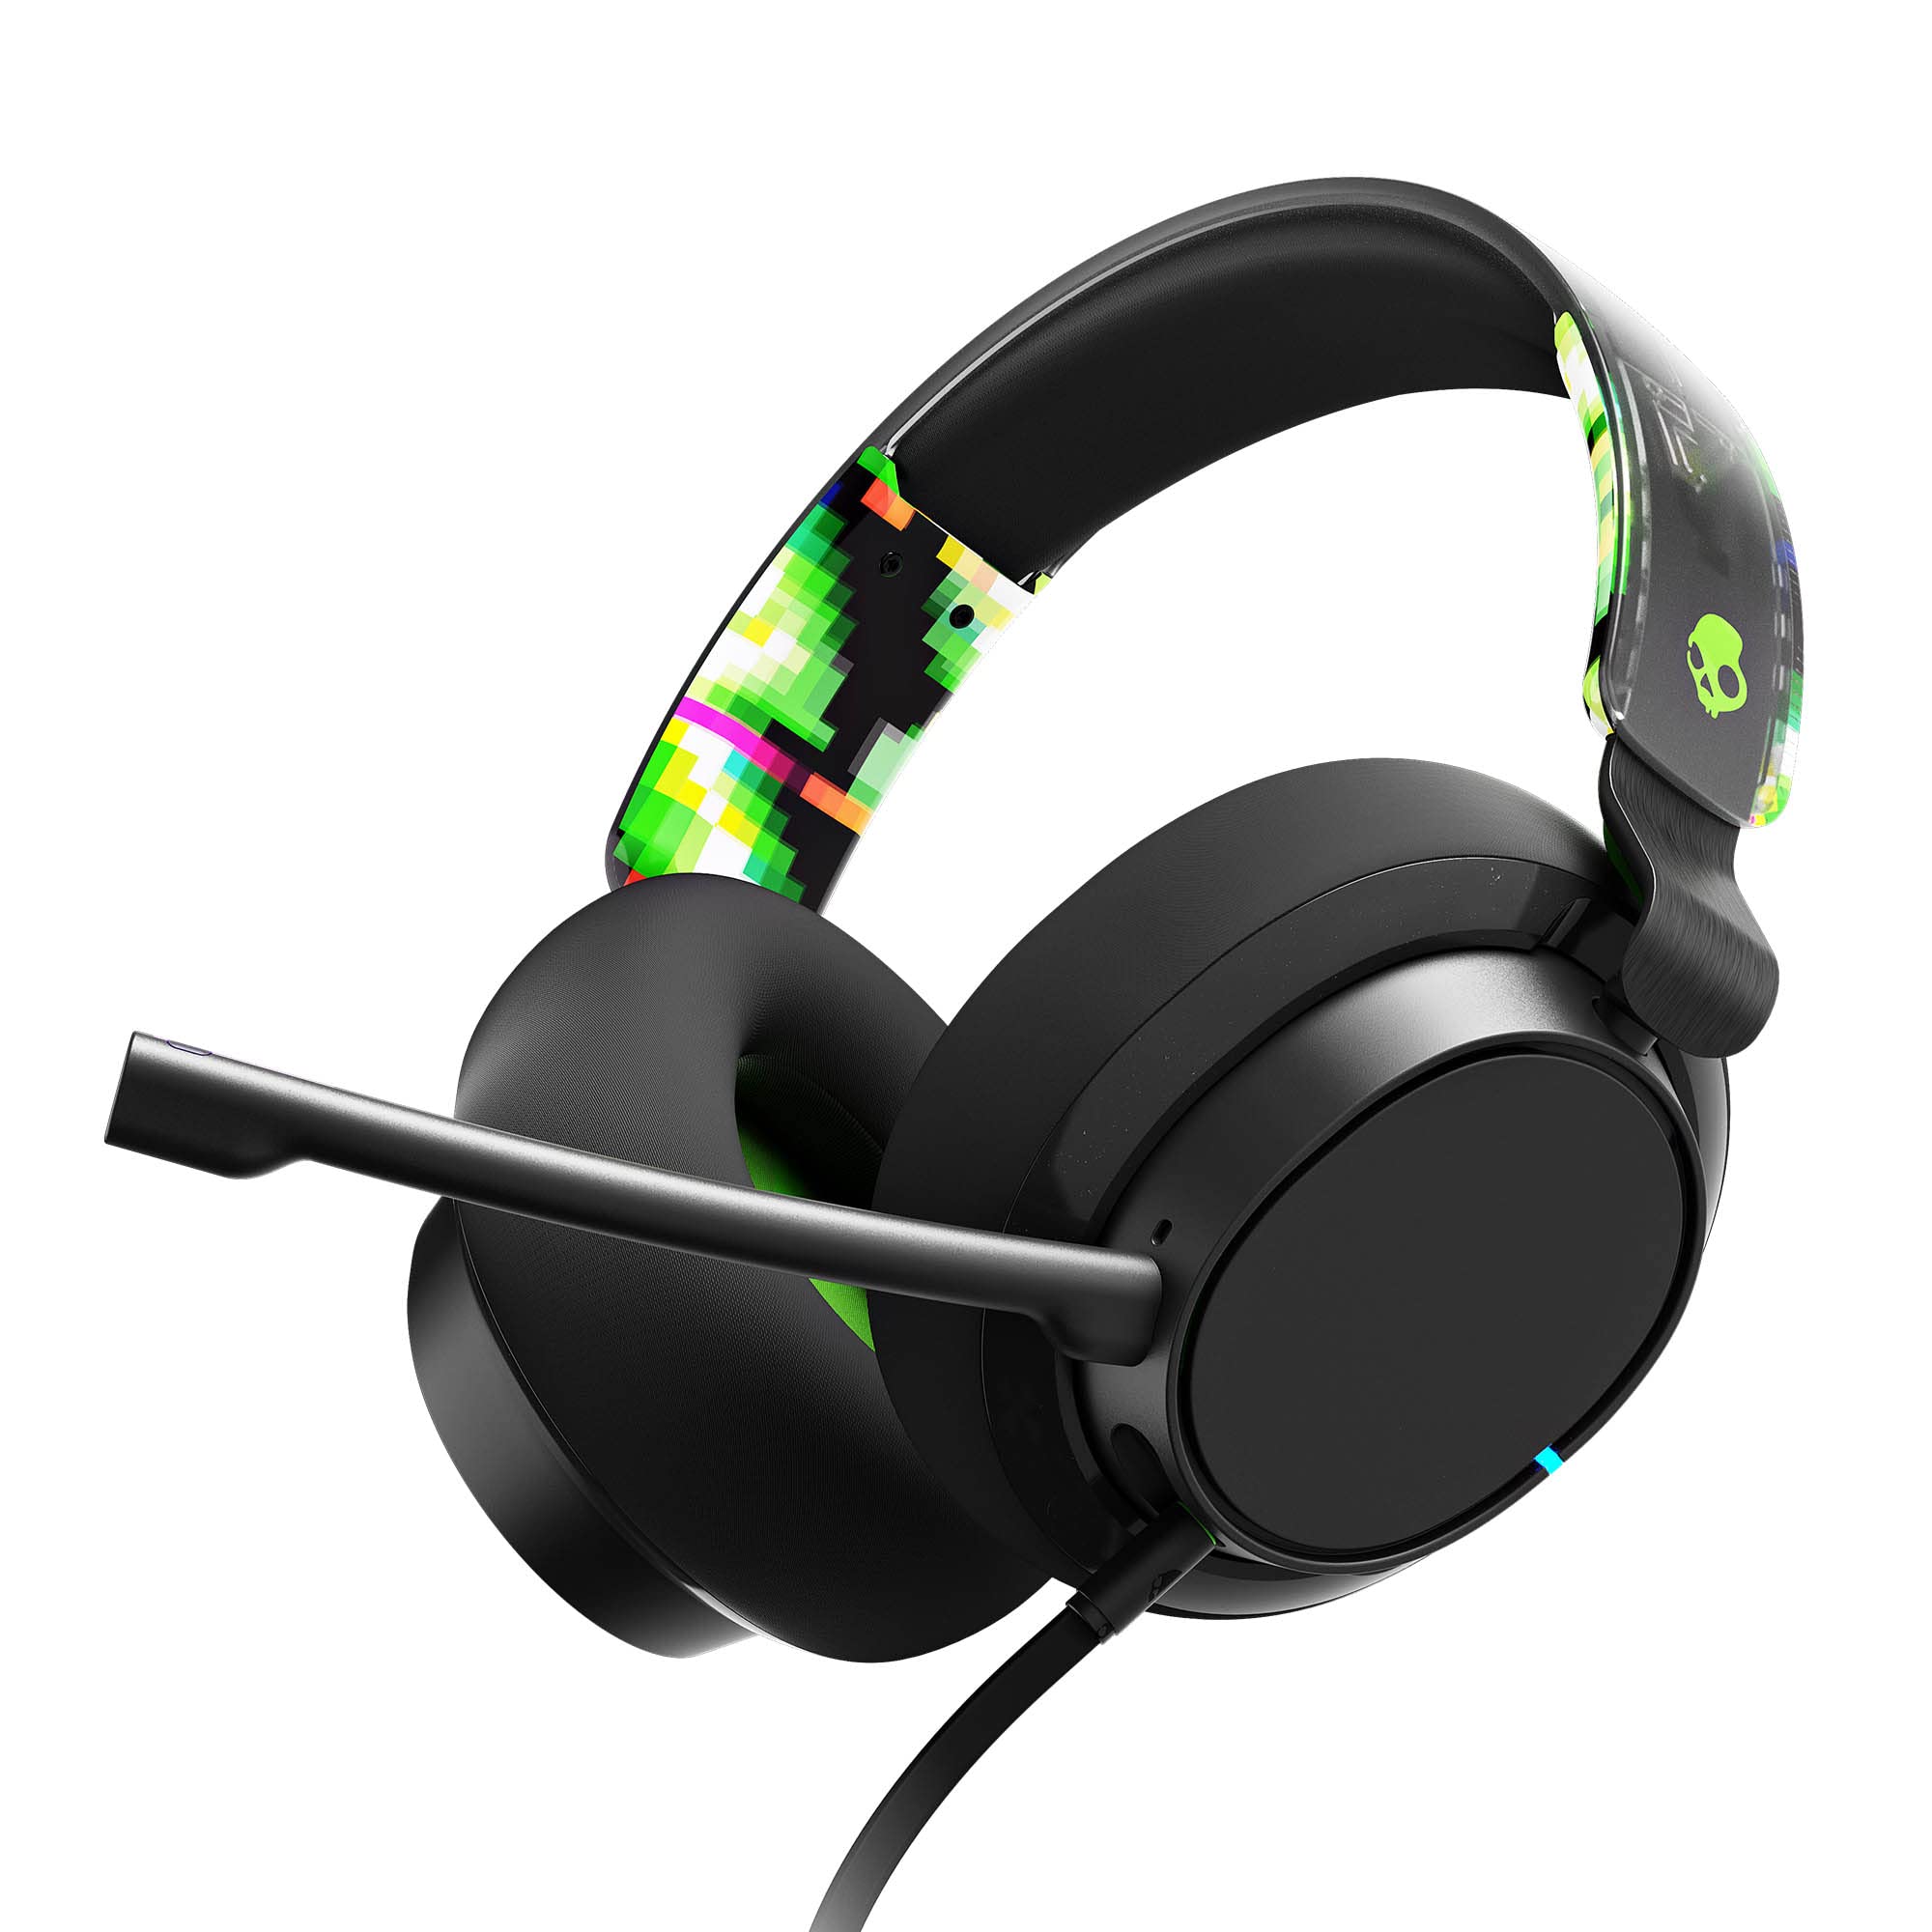 Skullcandy SLYR Pro Multi-Platform Over-Ear Wired Gaming Headset for Xbox Playstation & PC (Green or Black Digi-Hype) $44.88 + Free Shipping